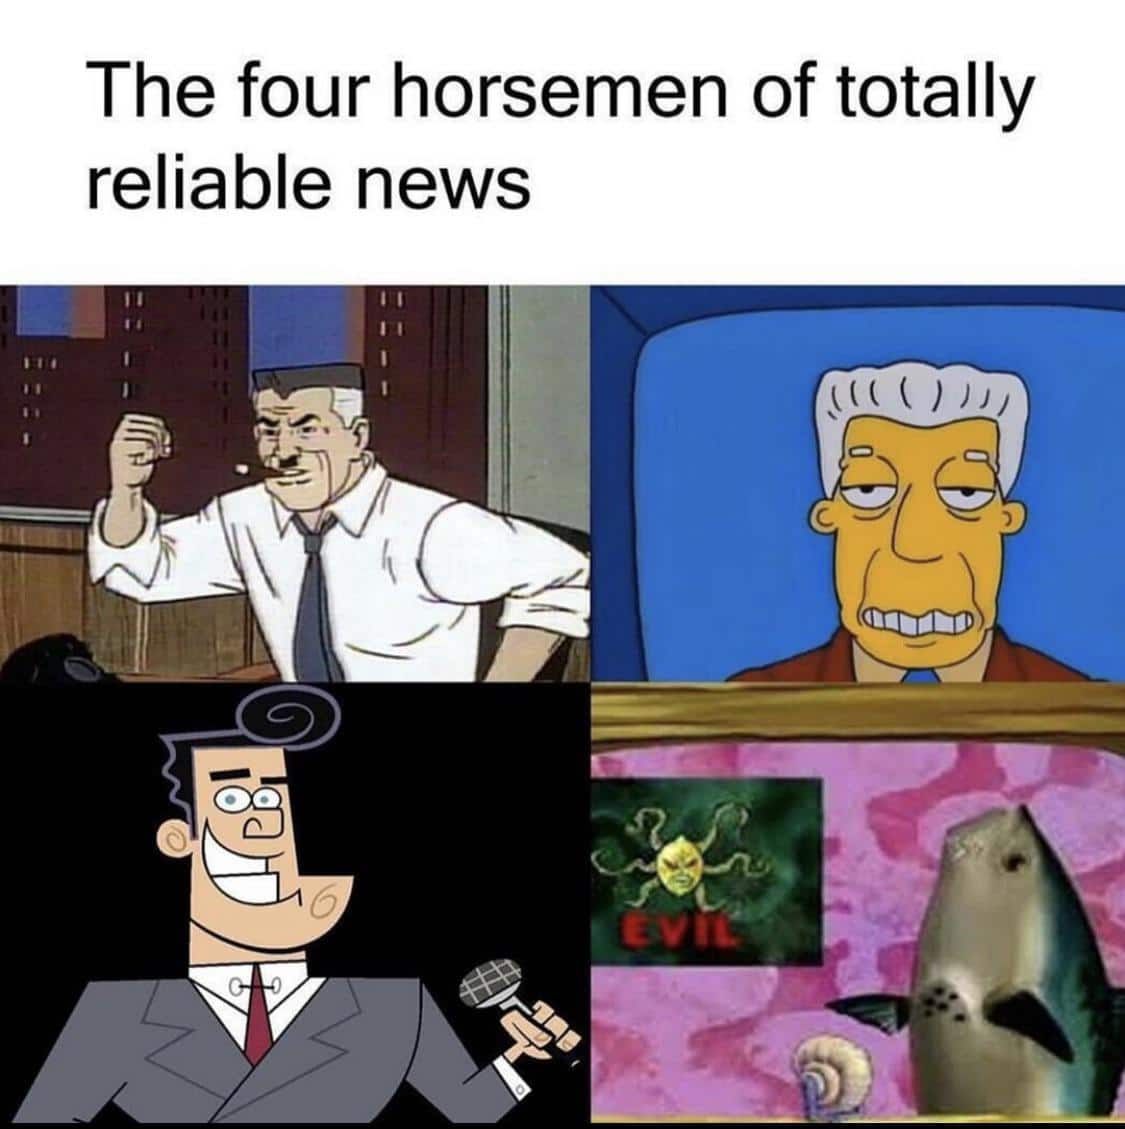 Spongebob, Spider-Man, Gary Gnu, Realistic Fish Head, Perd Hapley, Perd Spongebob Memes Spongebob, Spider-Man, Gary Gnu, Realistic Fish Head, Perd Hapley, Perd text: The four horsemen of totally reliable news 00 